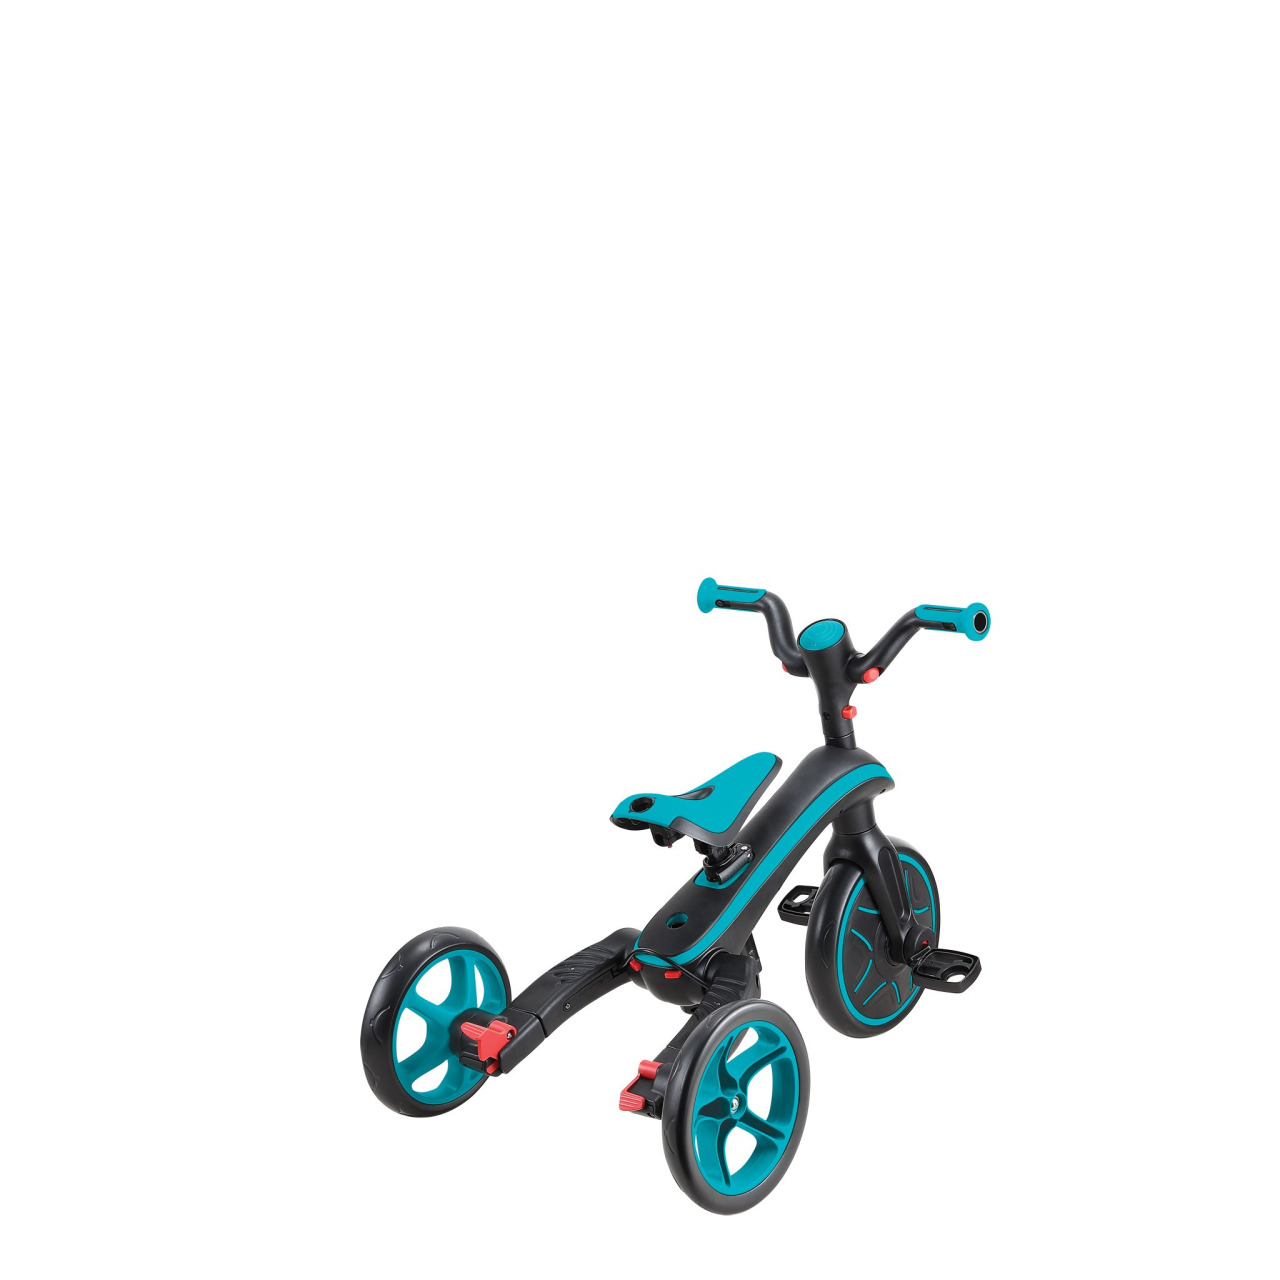 732 105 3 Wheel 4 In 1 Tricycle For Toddlers